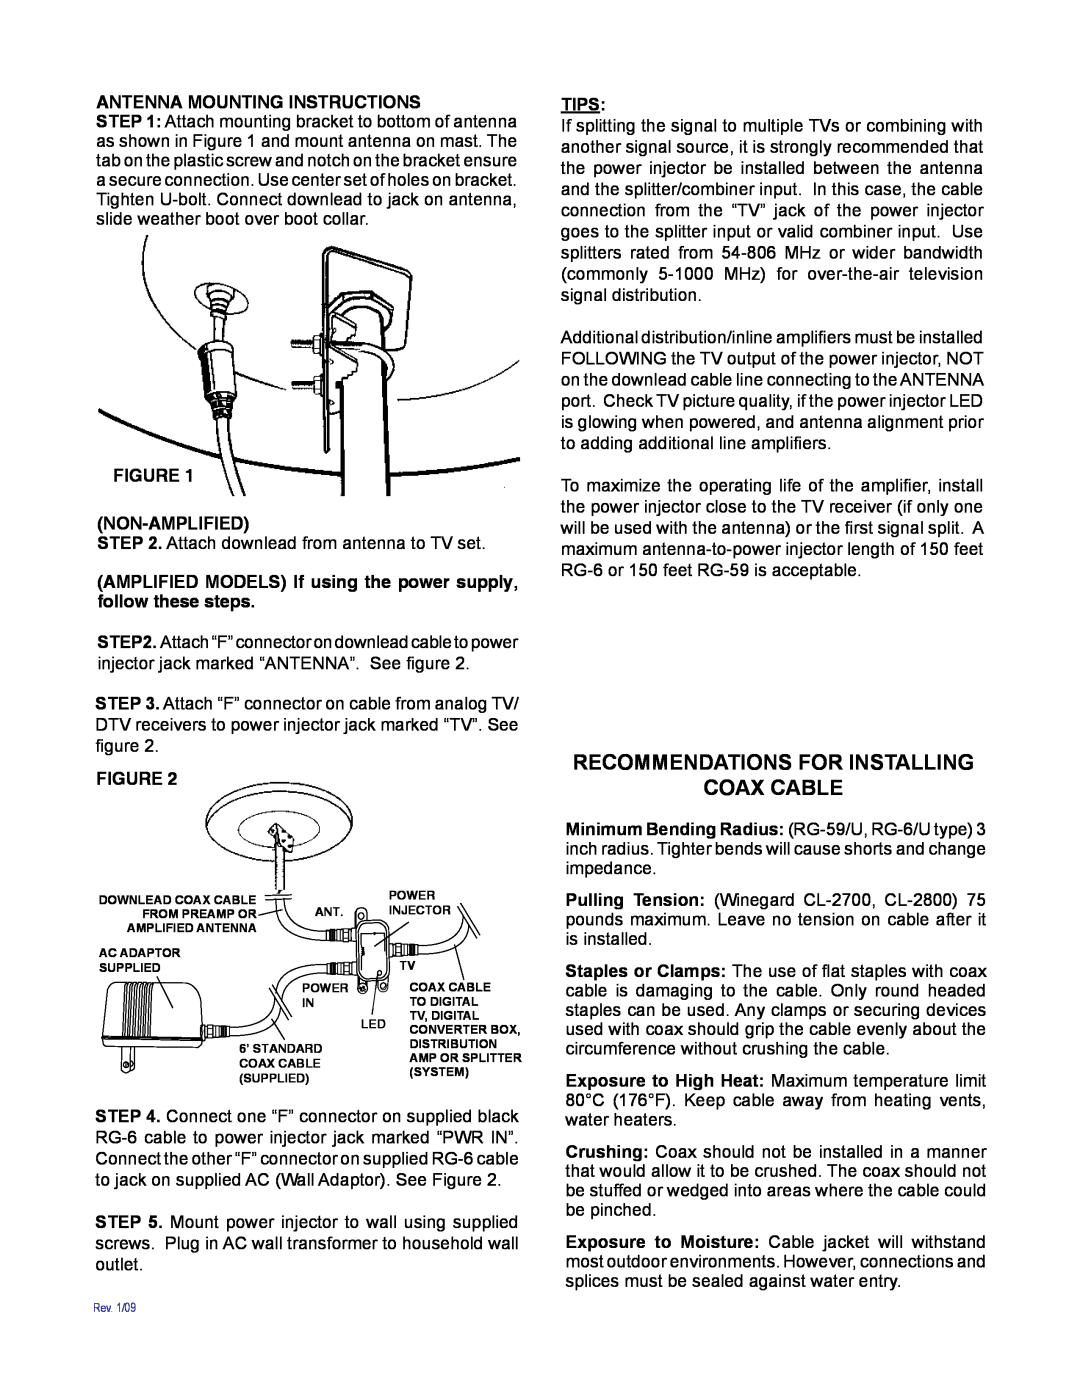 Winegard MS-1002, MS-2006 BULK Recommendations For Installing, Coax Cable, Antenna Mounting Instructions, Non-Amplified 